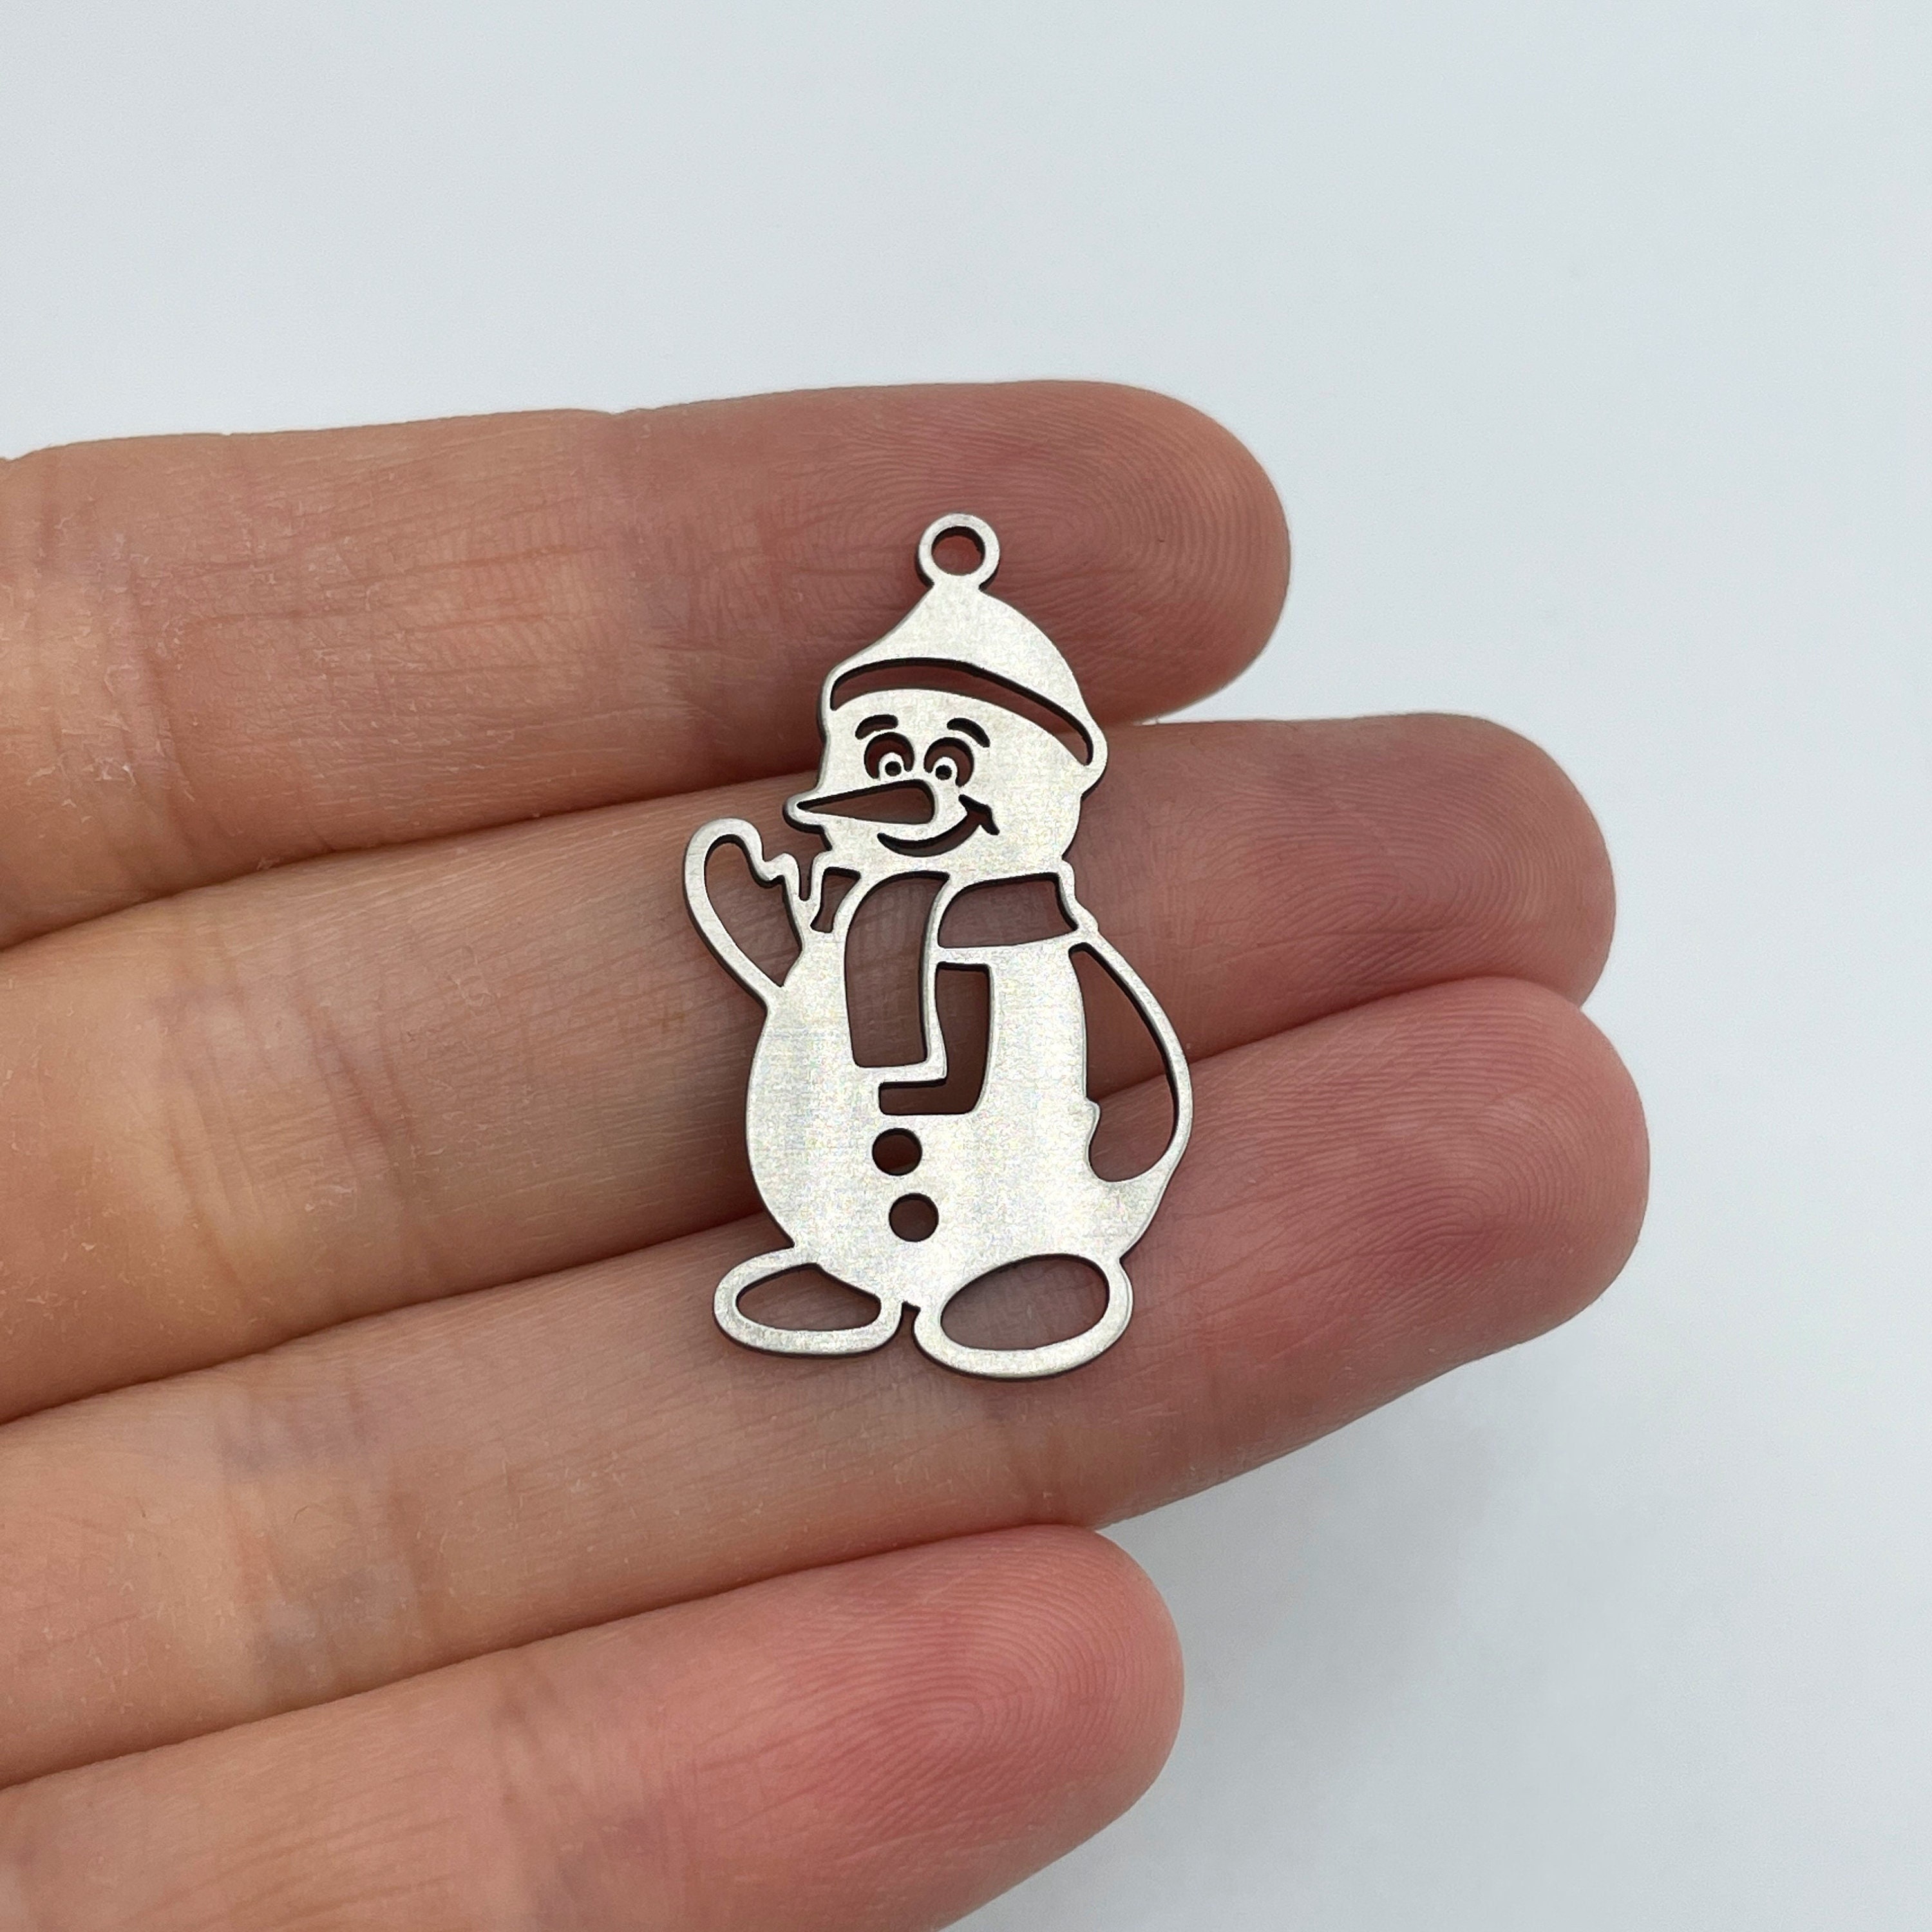 2pcs Stainless Steel Snowman Charm Laser Cut Jewelry Making Supplies STL-3420 Snowman Pendant Winter Charms Christmas Charms